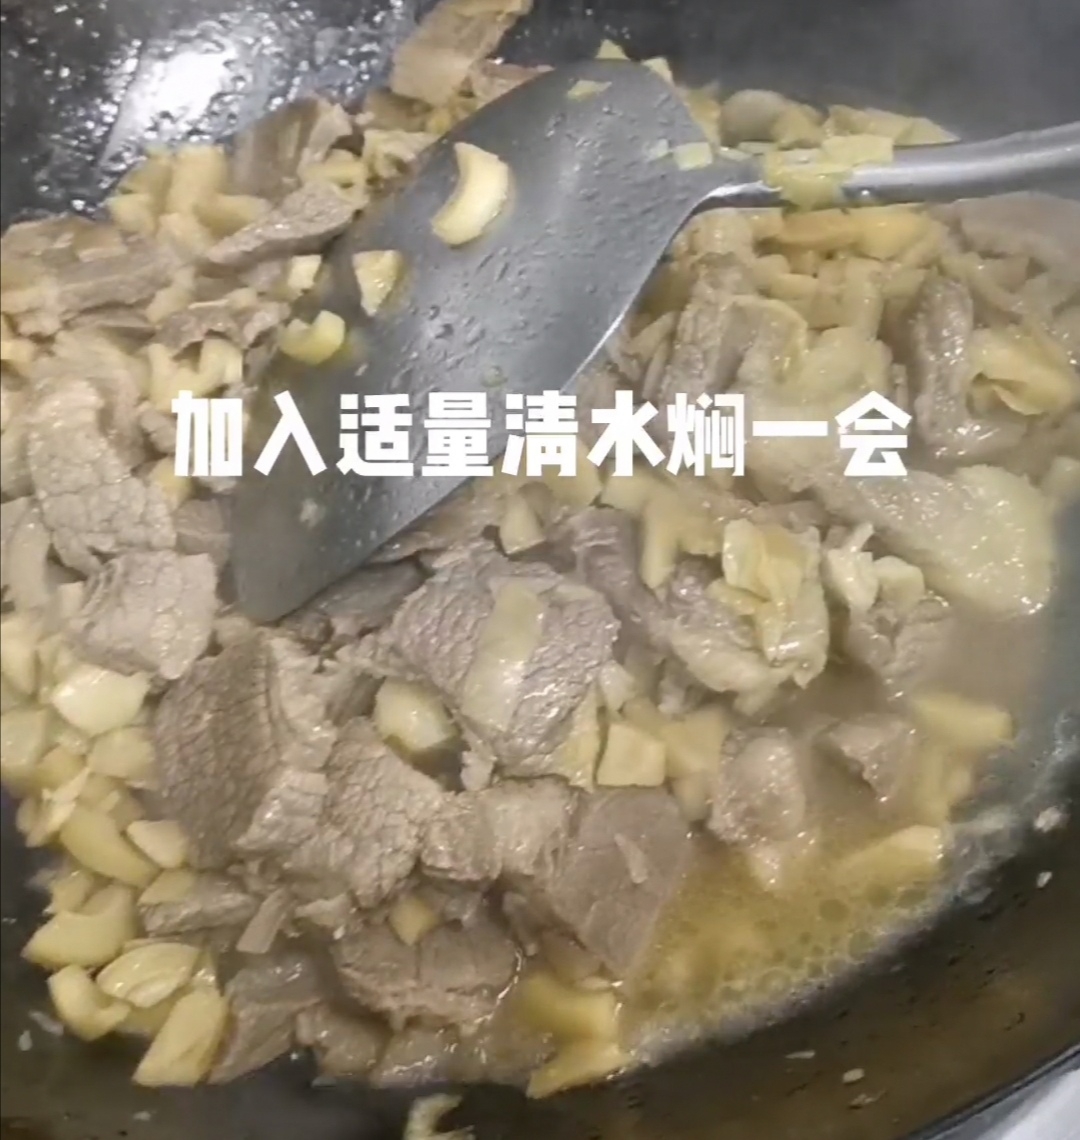 Stir-fried Beef Brisket with Spring Bamboo Shoots recipe